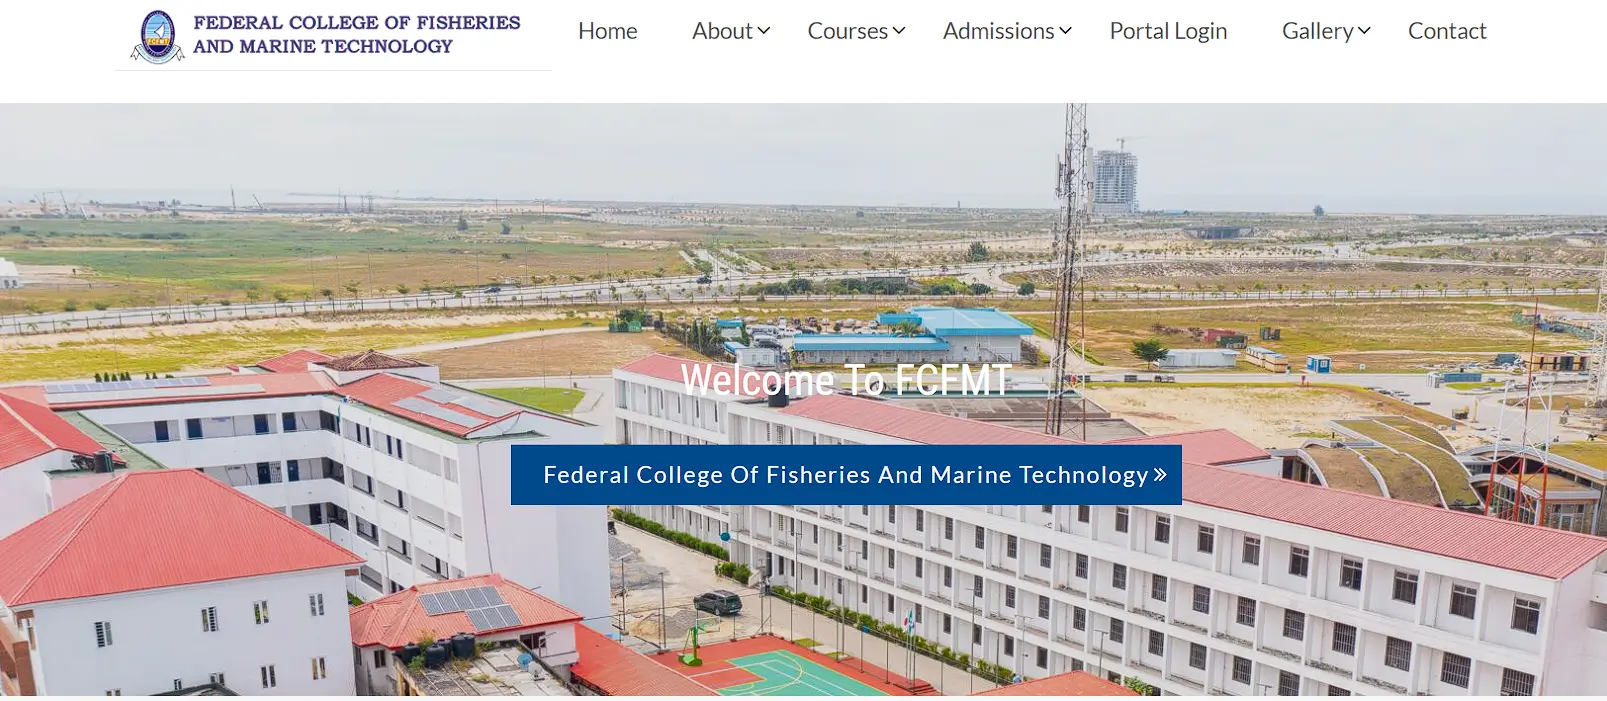 Federal College of Fisheries and Marine Technology, Lagos